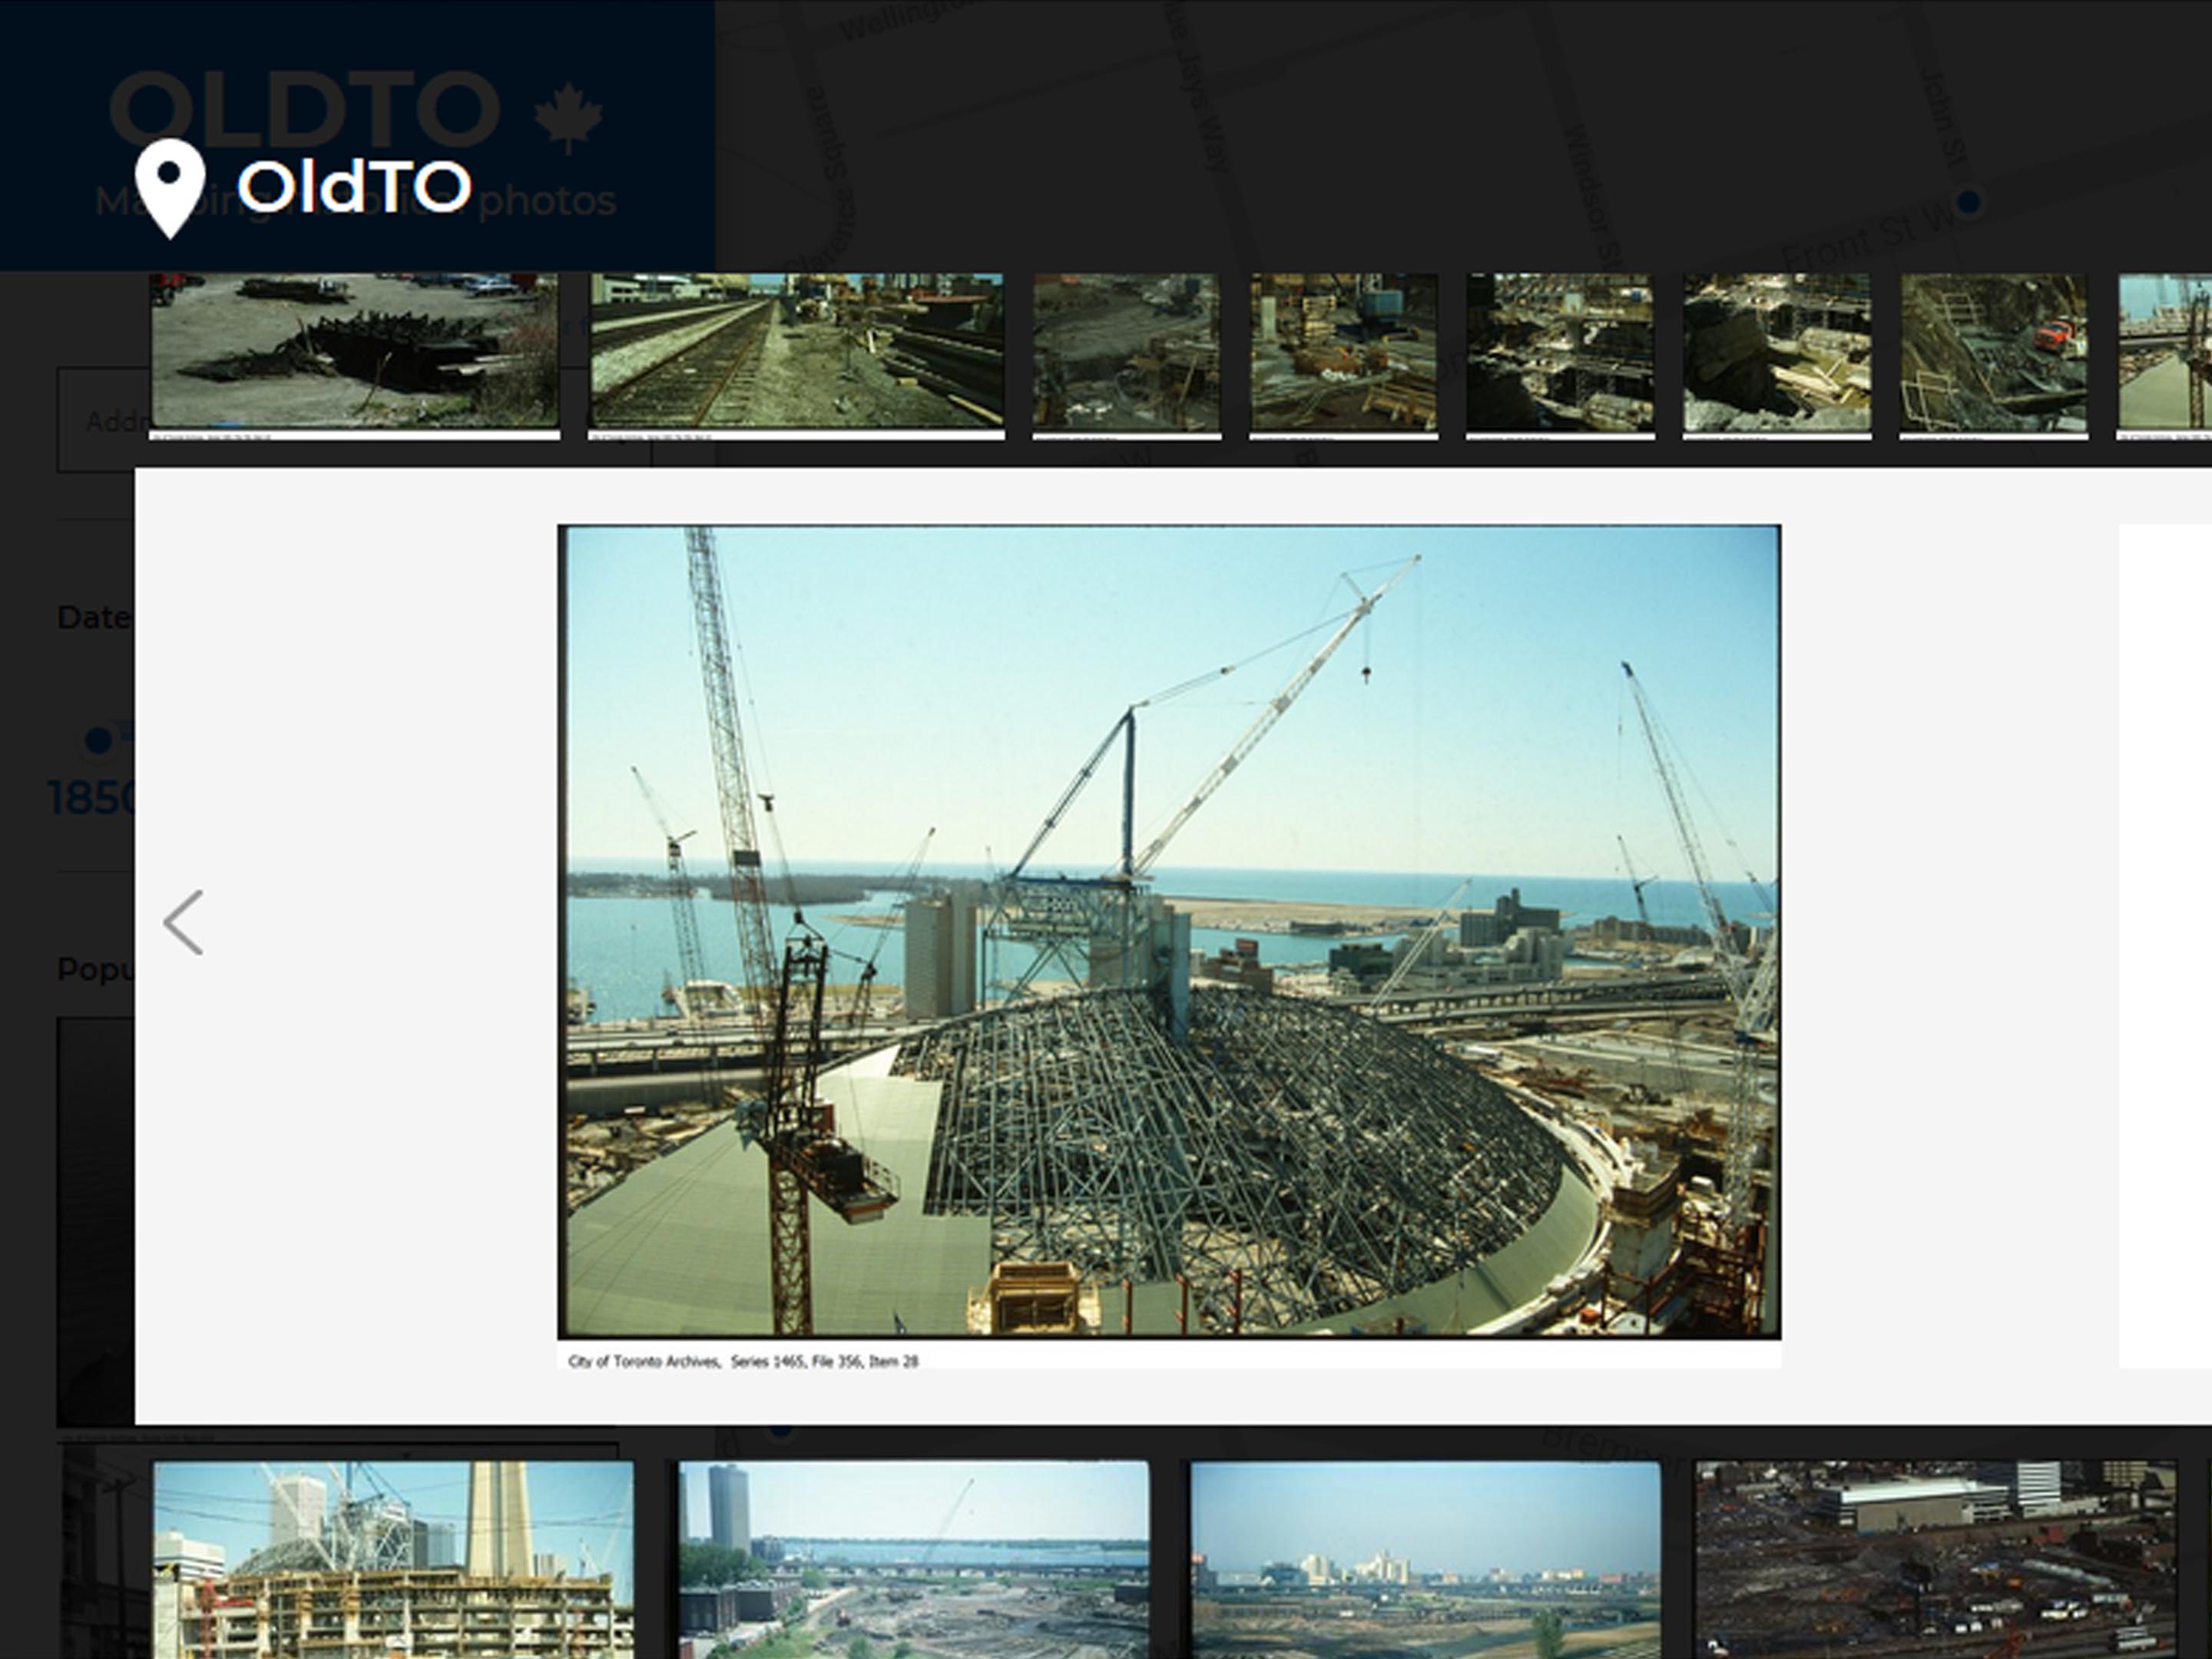 Screenshot of Skydome construction from Old Toronto collection